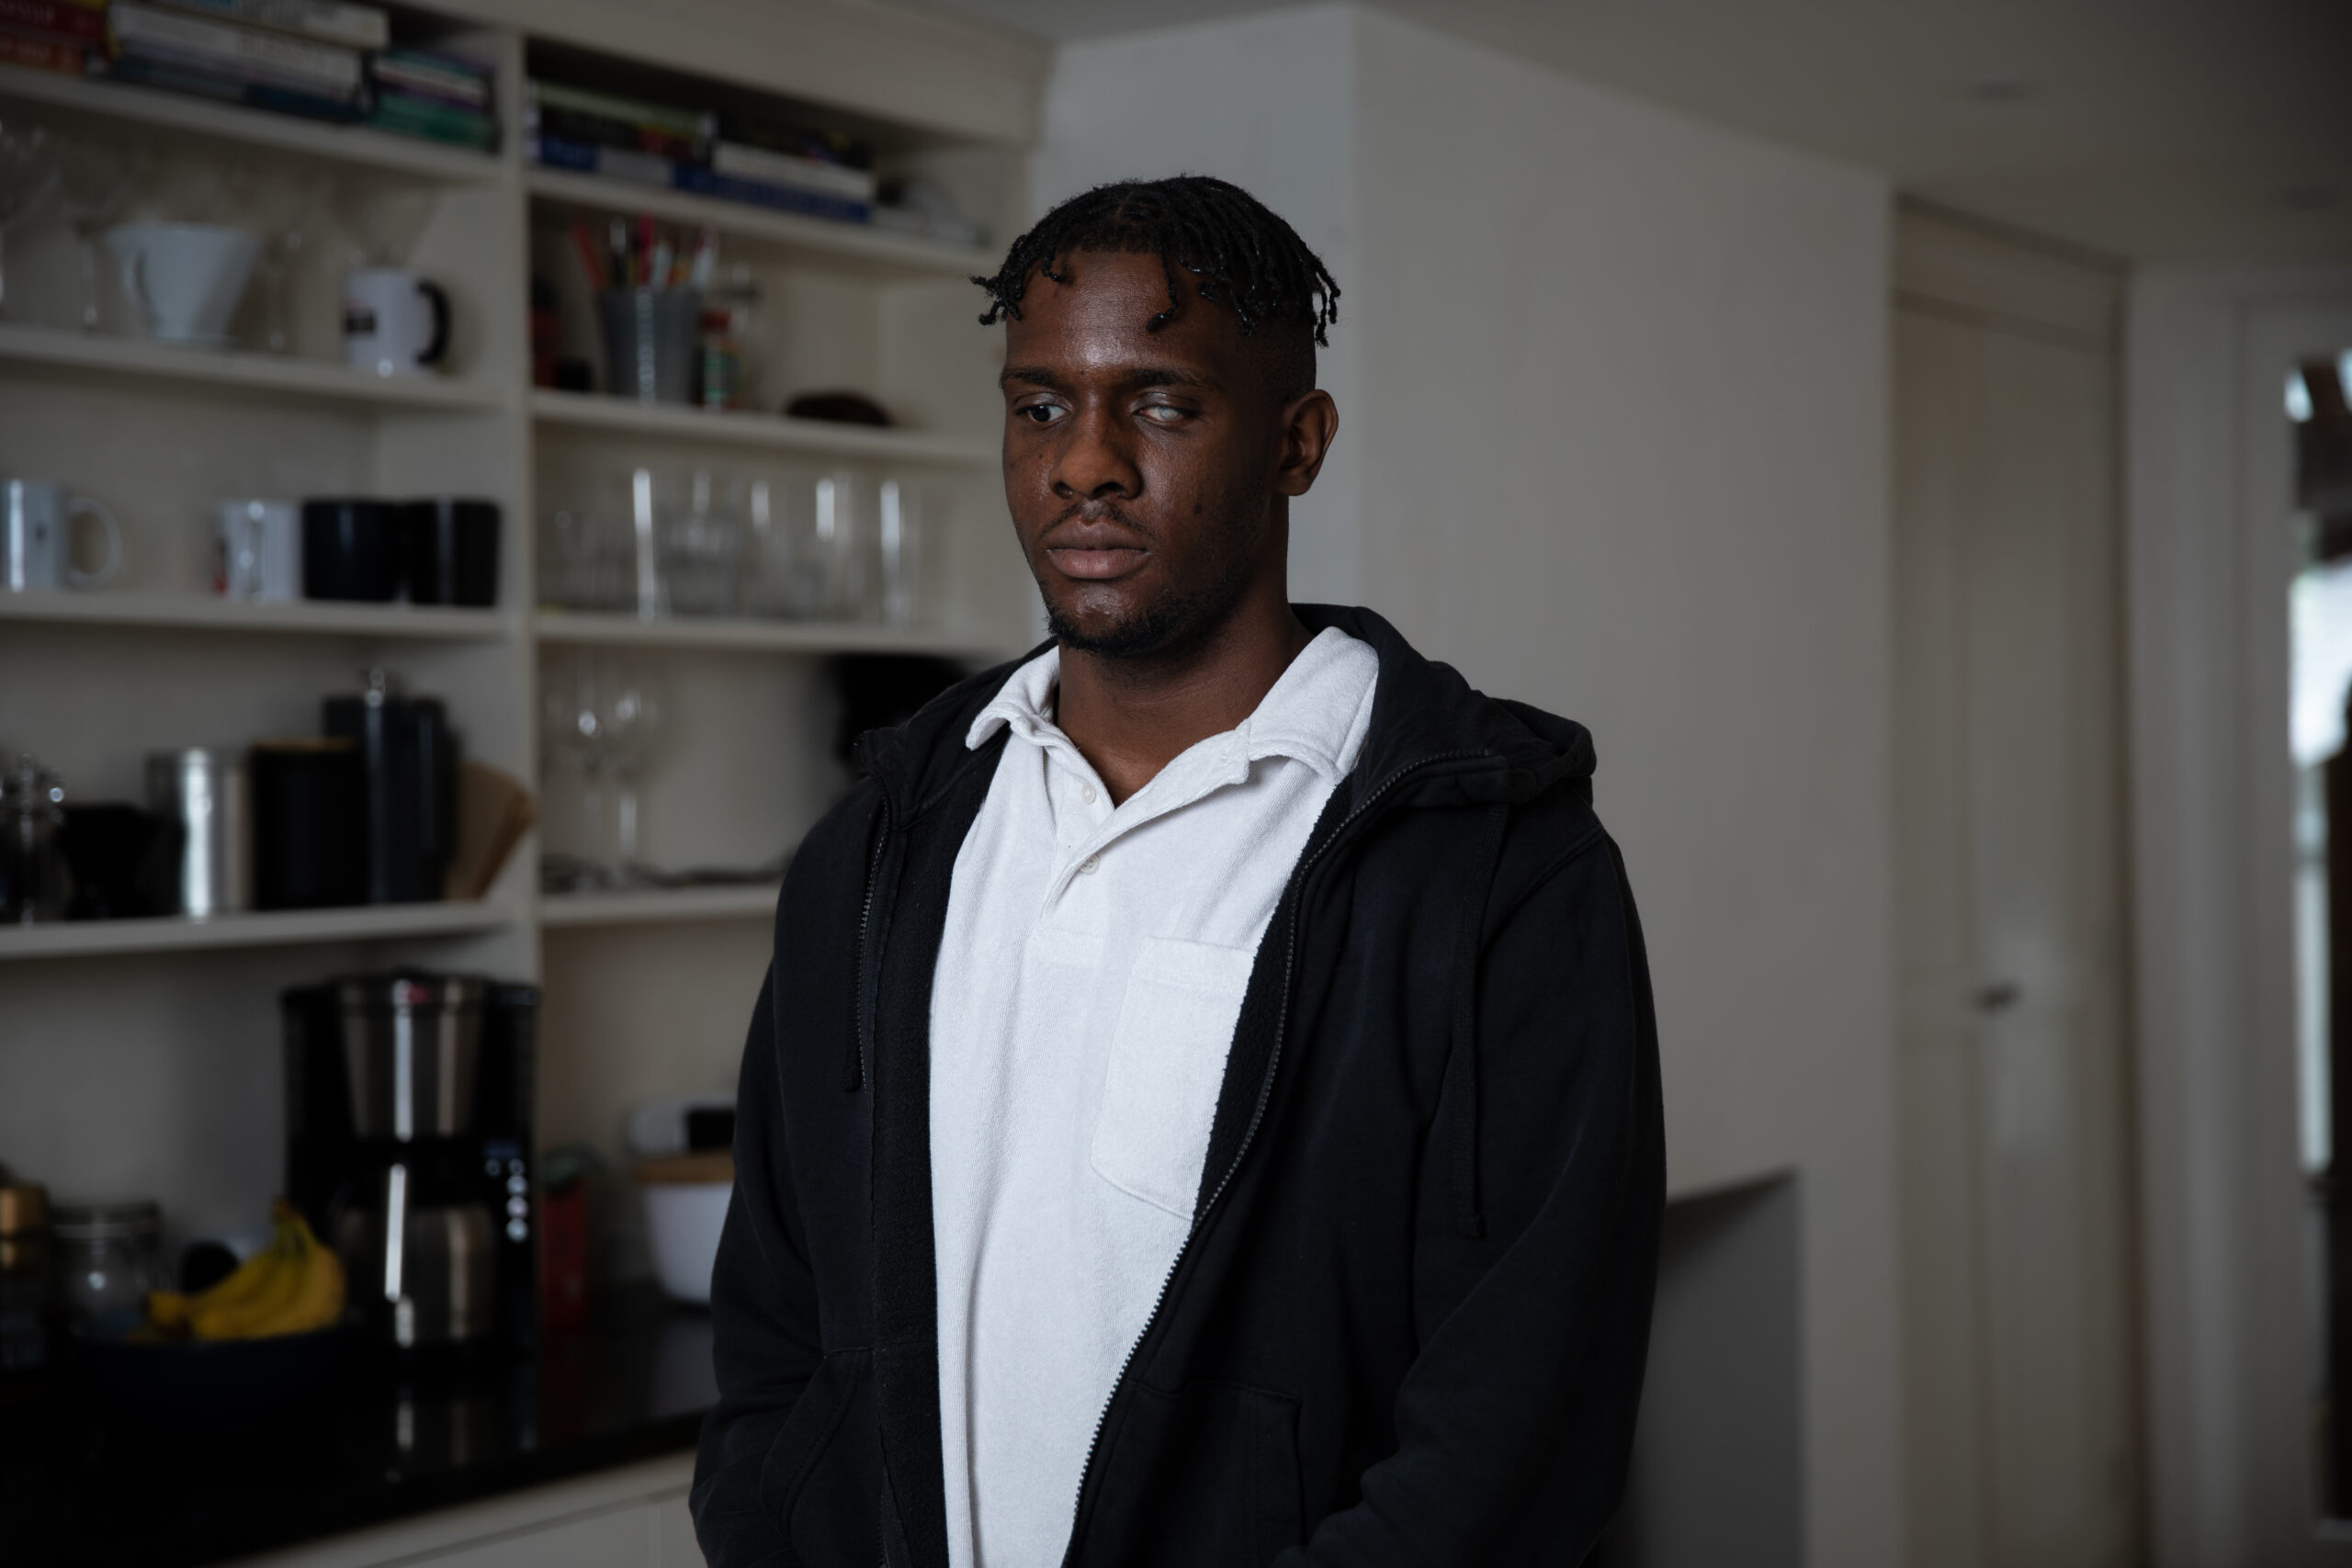 Fikayo, a young black man stands in a living room looking down at the floor. He's wearing a white shirt and black hoodie